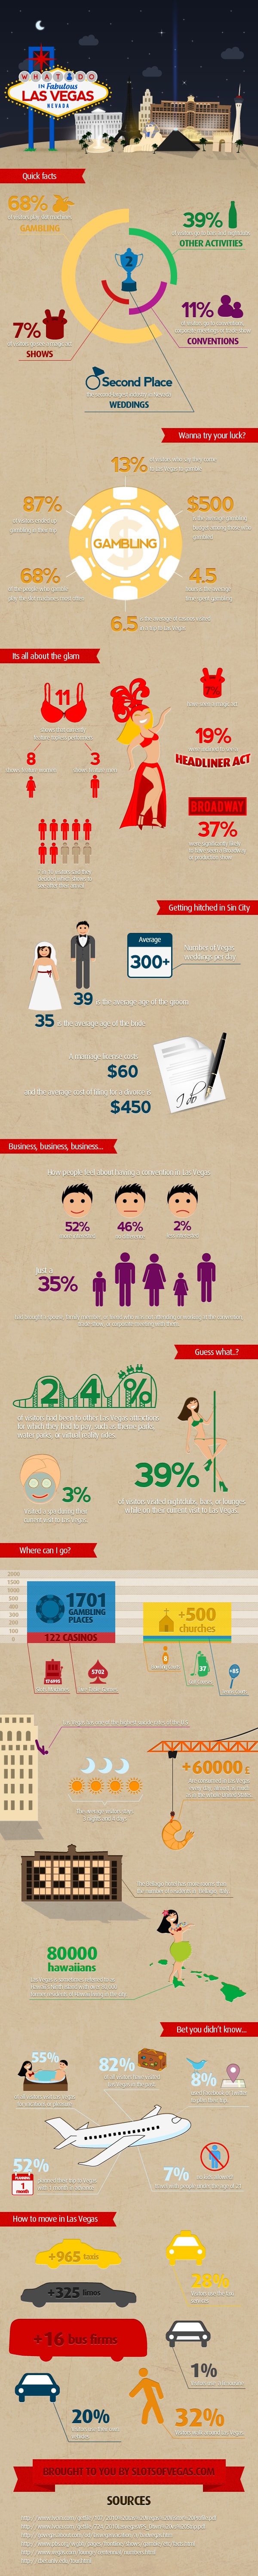 Things people do in las vegas infographic